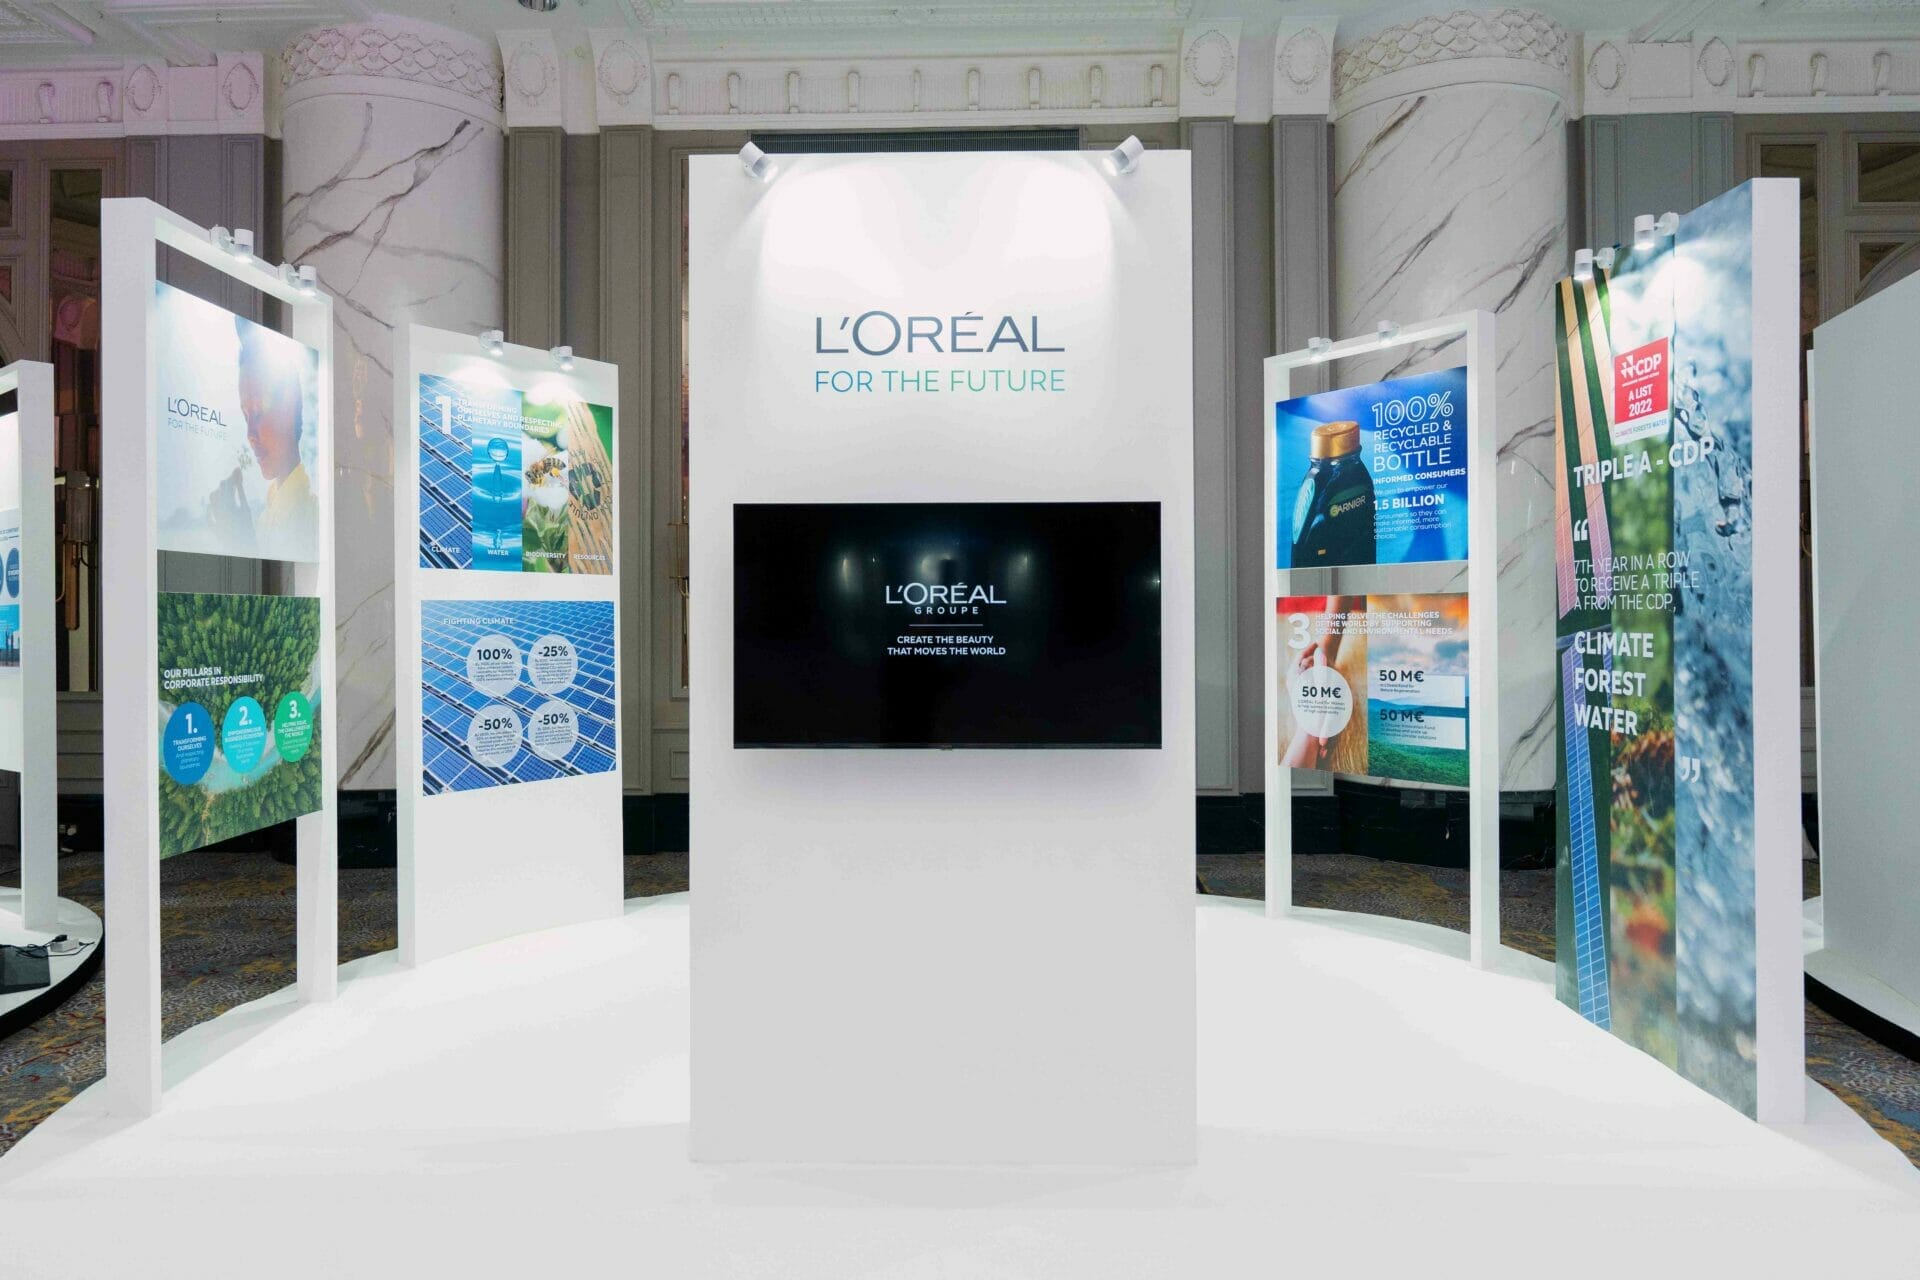 L'Oréal For the Future showcase the brand's commitment on beauty that moves the world.